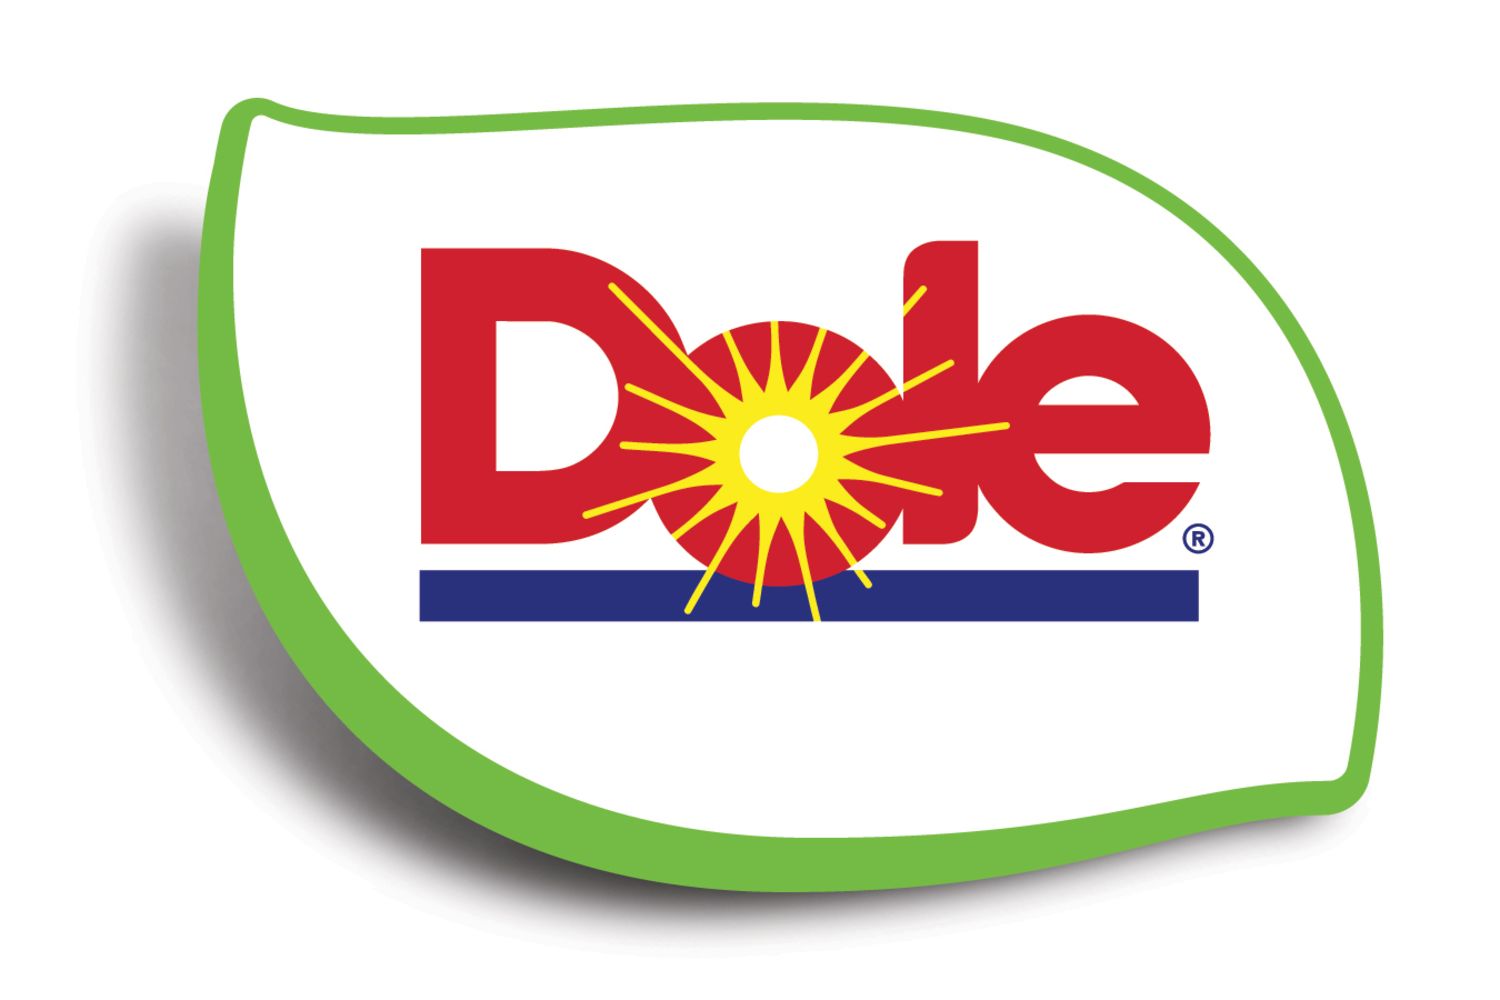 Dole Food Co Trucks, Cars, Farming and Agricultural Equipment